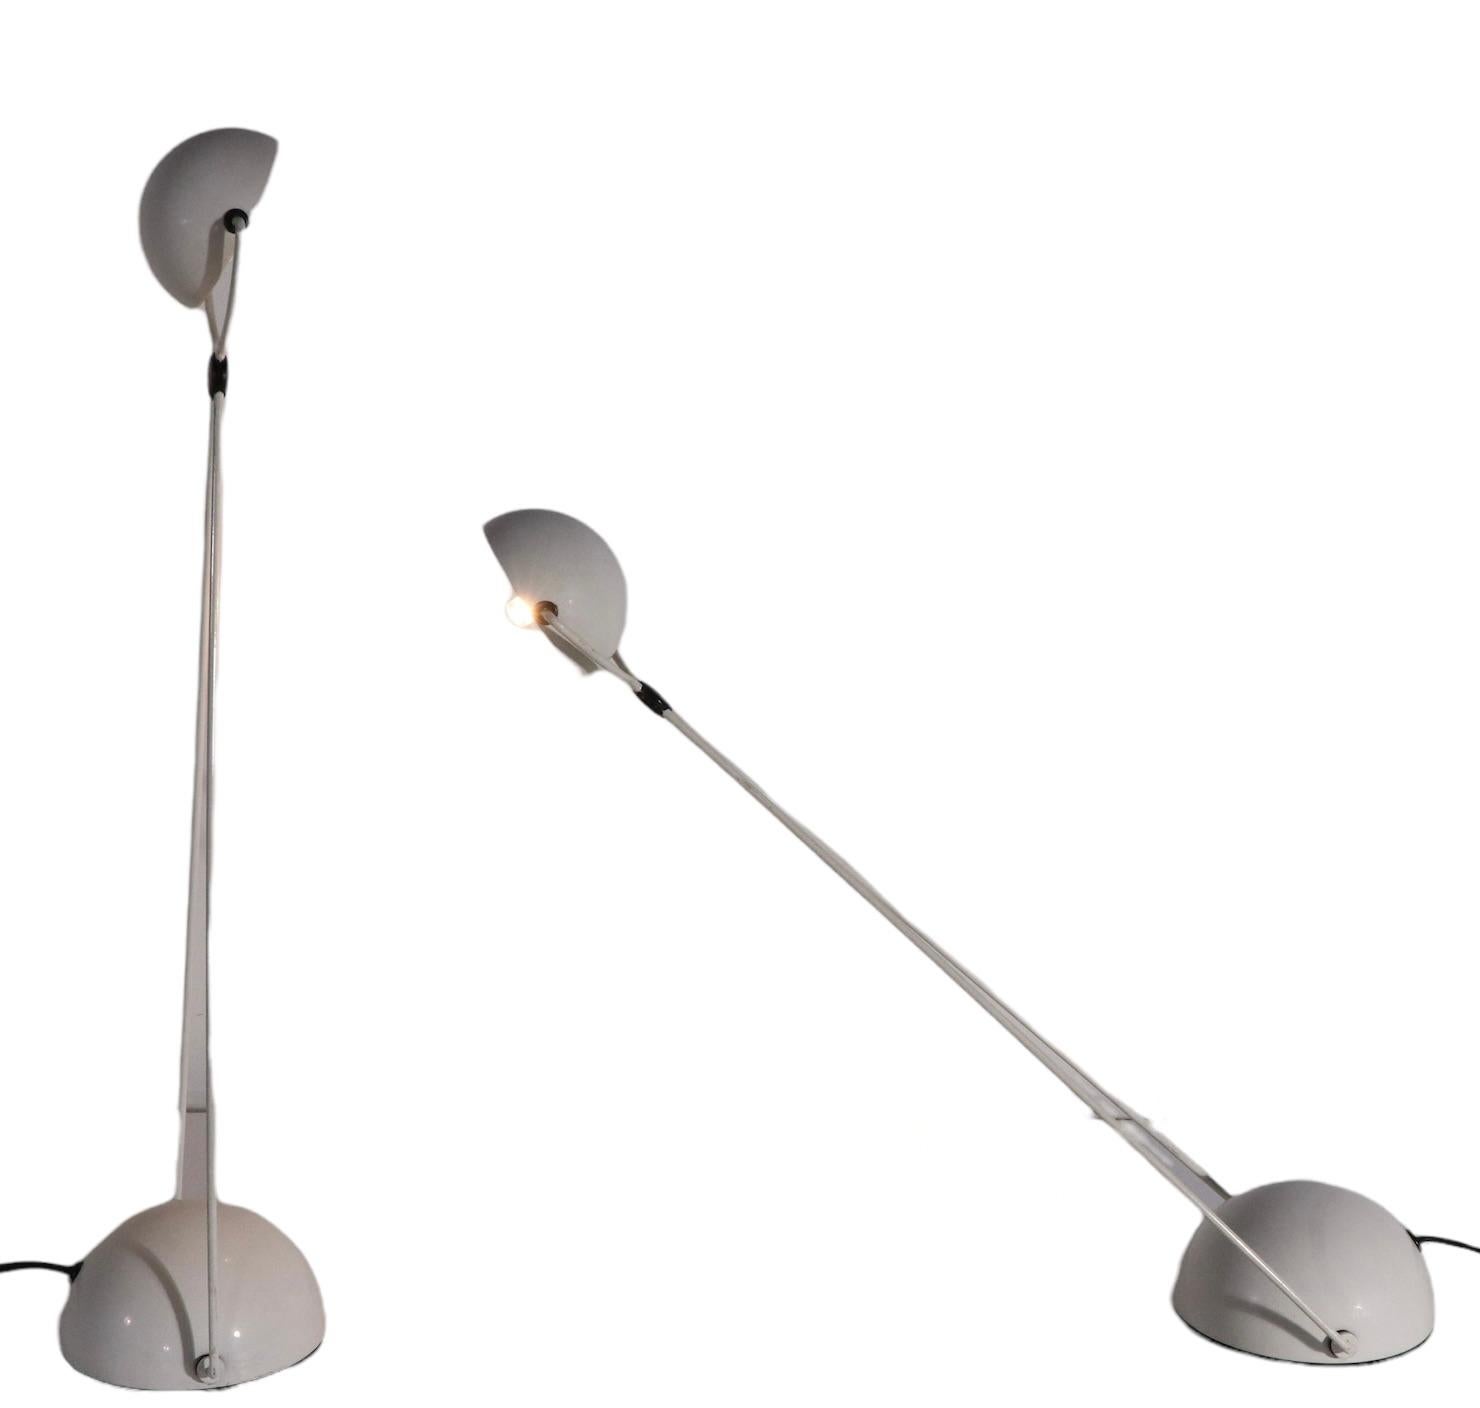 Pr Metal Angle Poise Lamps Designed by Stefano Cevoli Made in Milan Italy 1980s In Good Condition For Sale In New York, NY